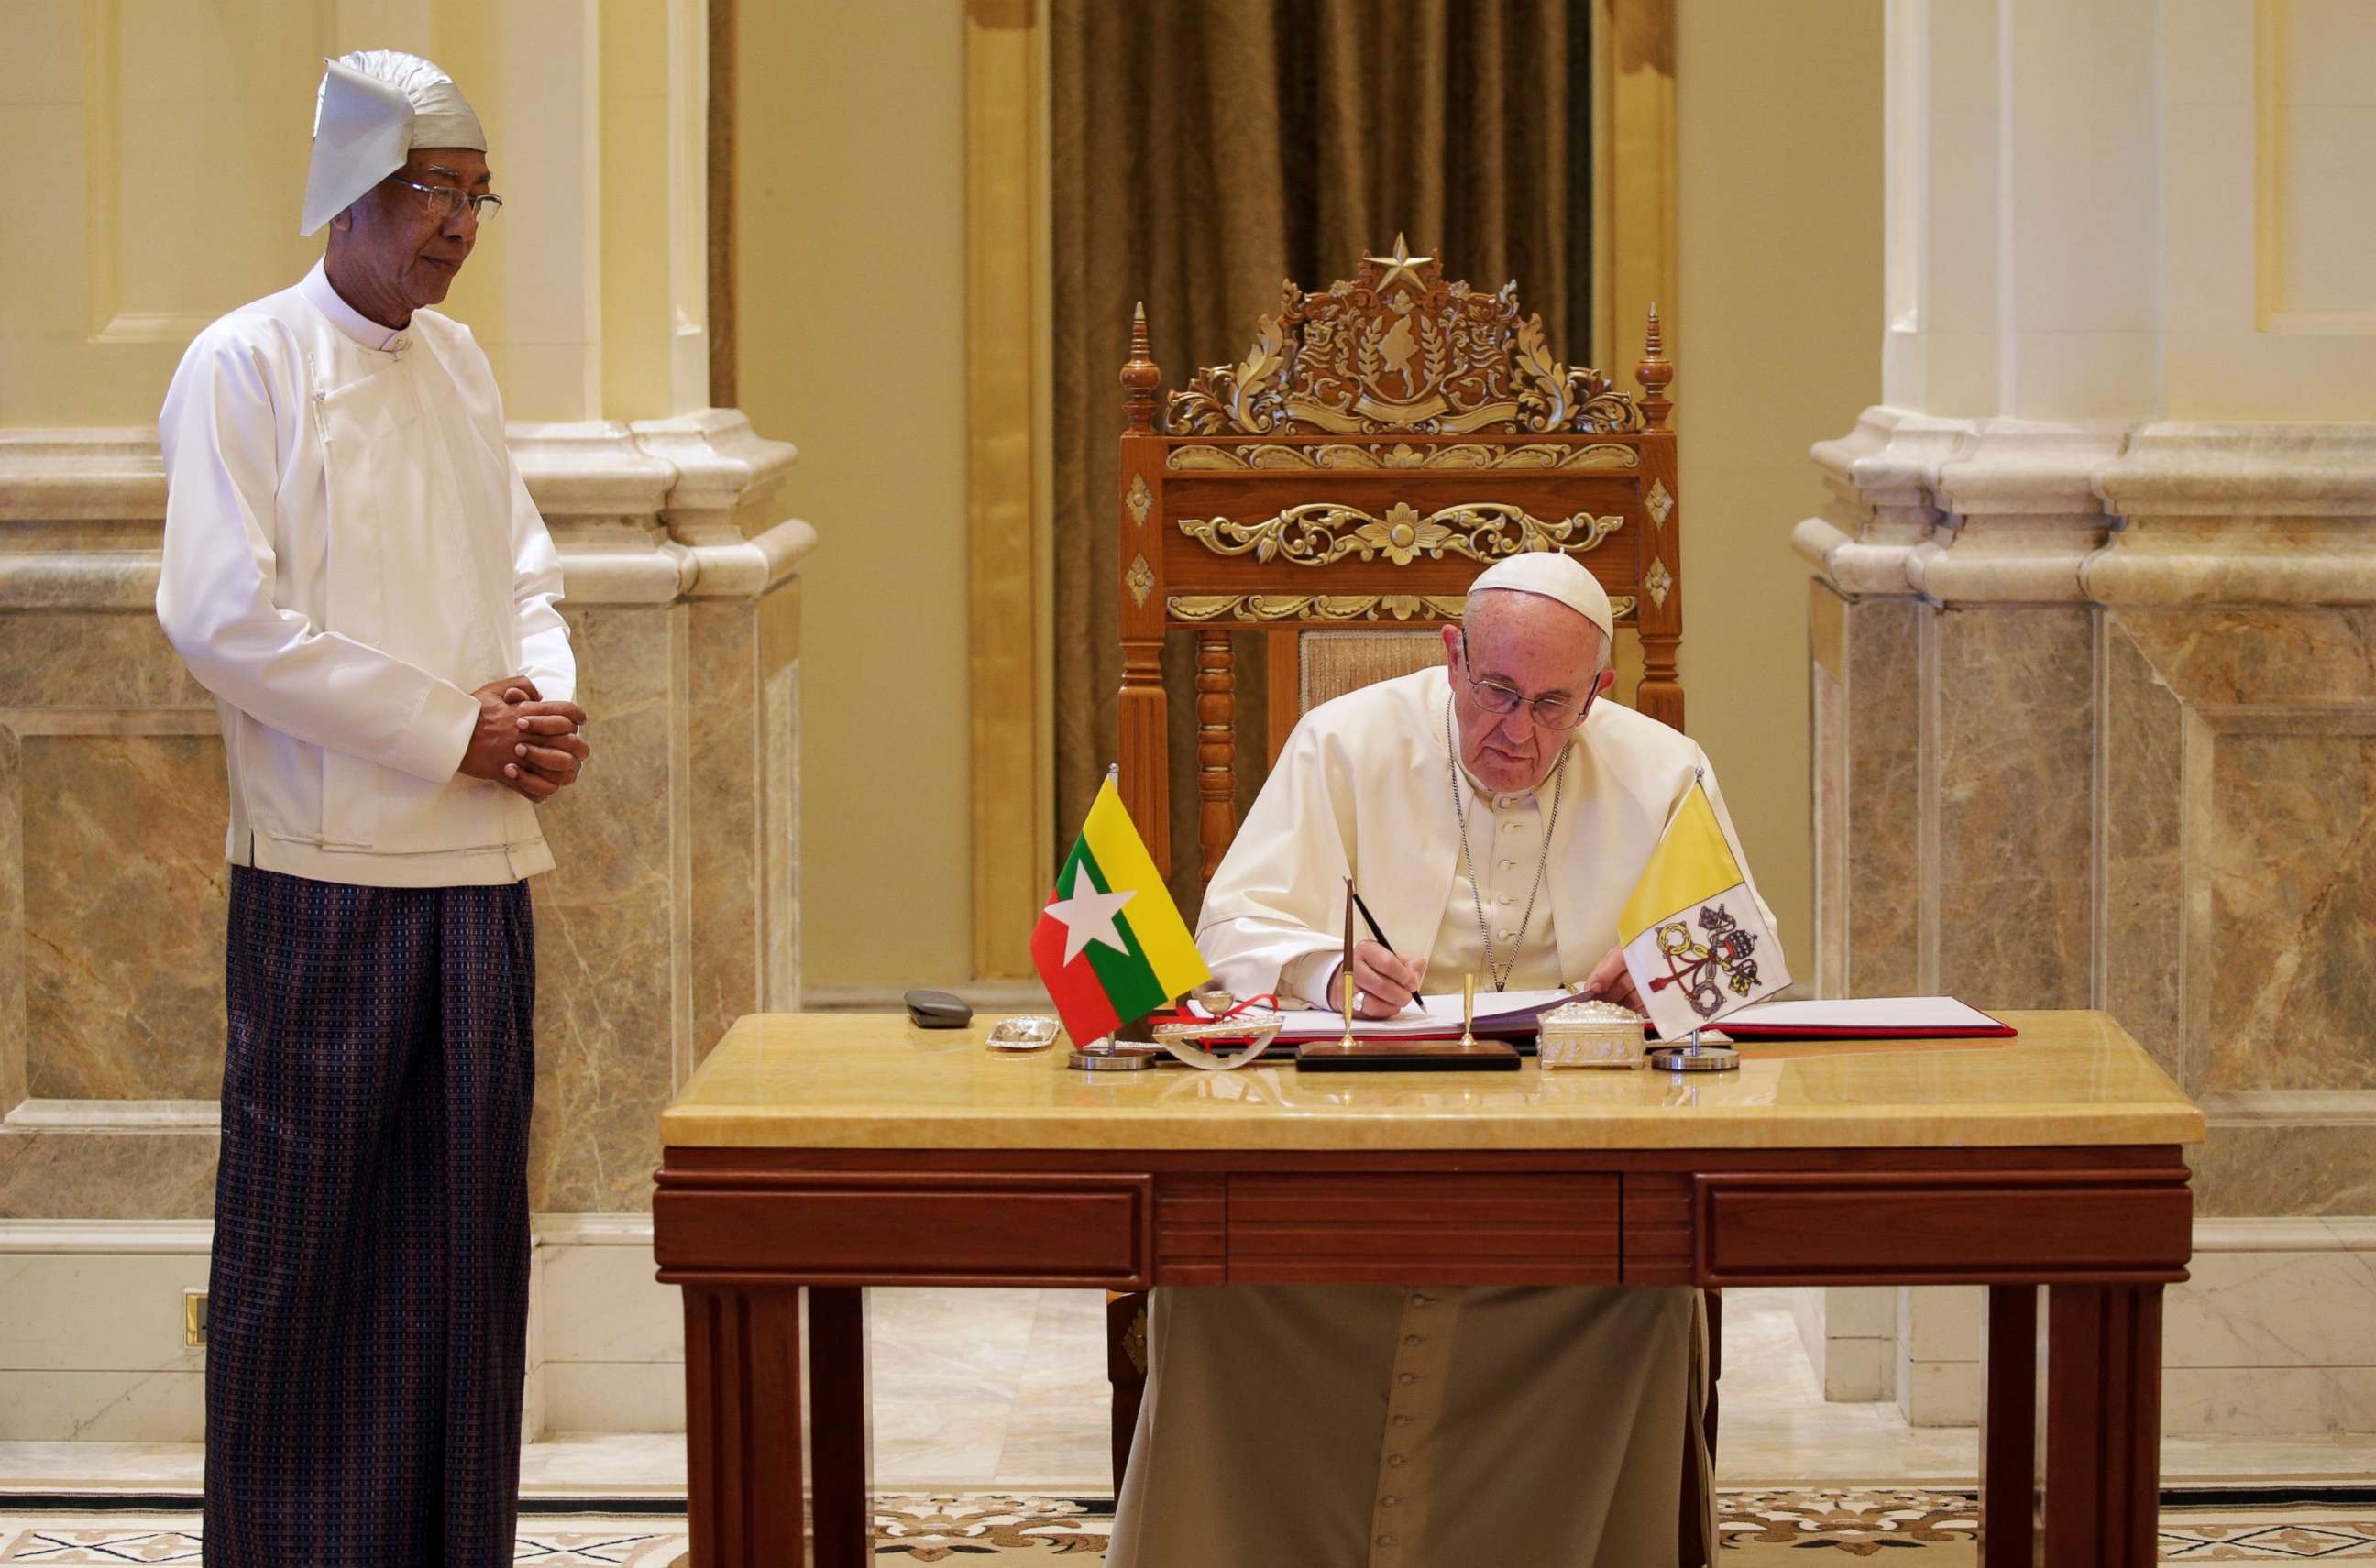 PHOTO: Pope Francis signs a guestbook as Myanmar's President Htin Kyaw looks on, at the Presidential Palace in Naypyitaw, Myanmar, Nov. 28, 2017.